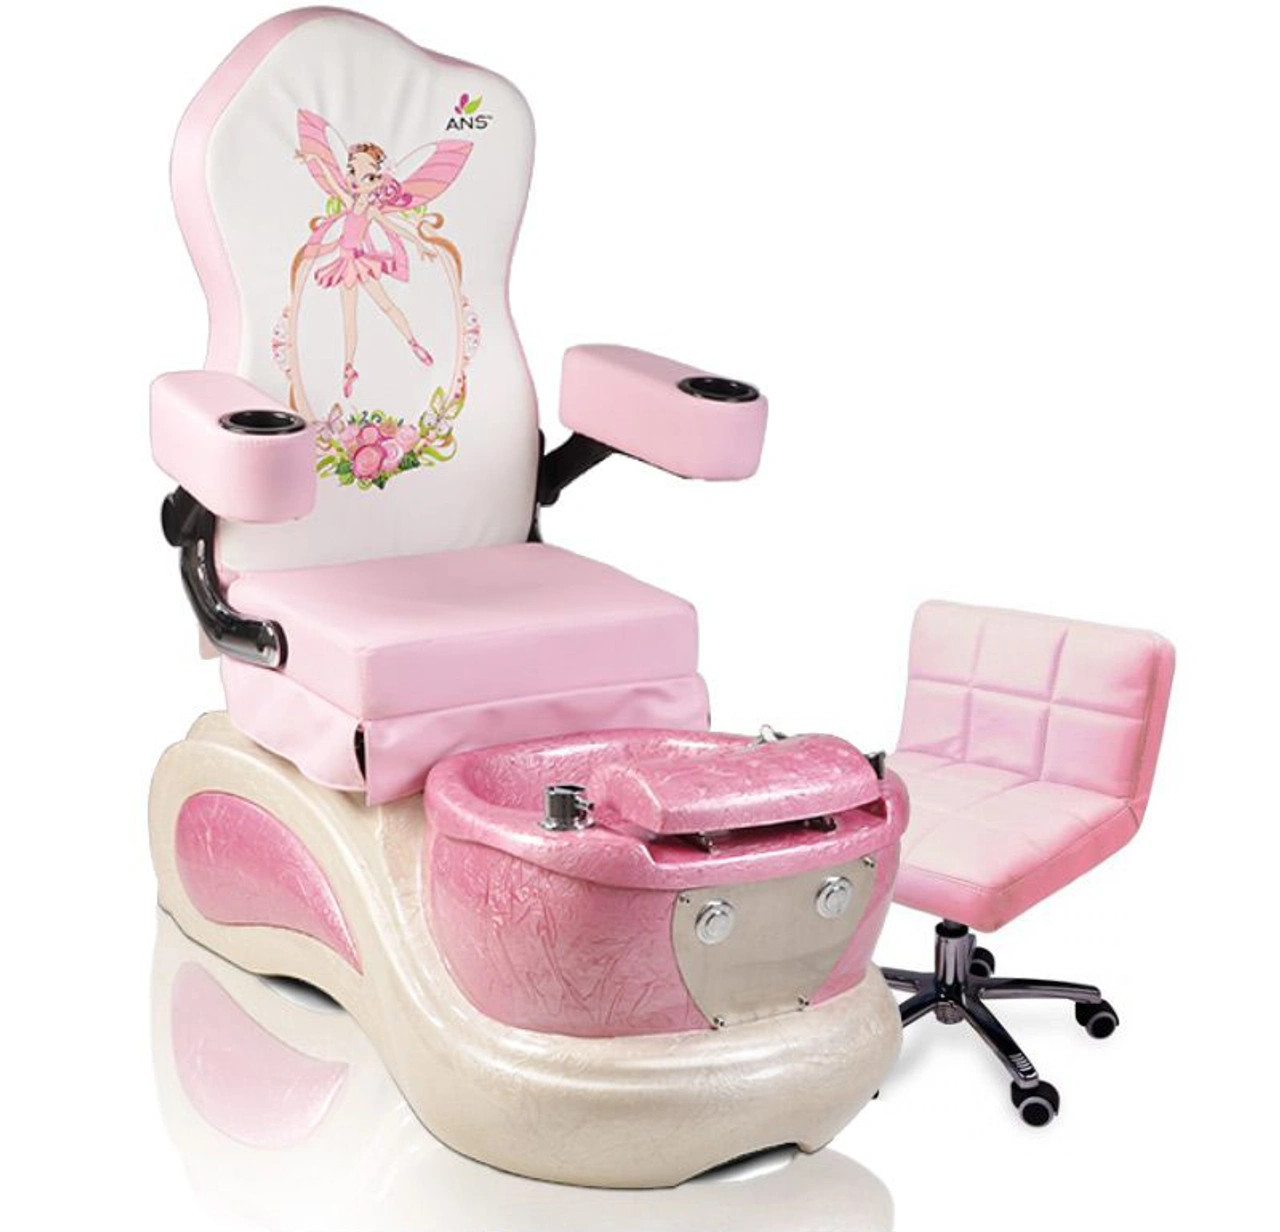 Superb Nail Supply | Living Earth Crafts | Contour Pedicure Spa Chair